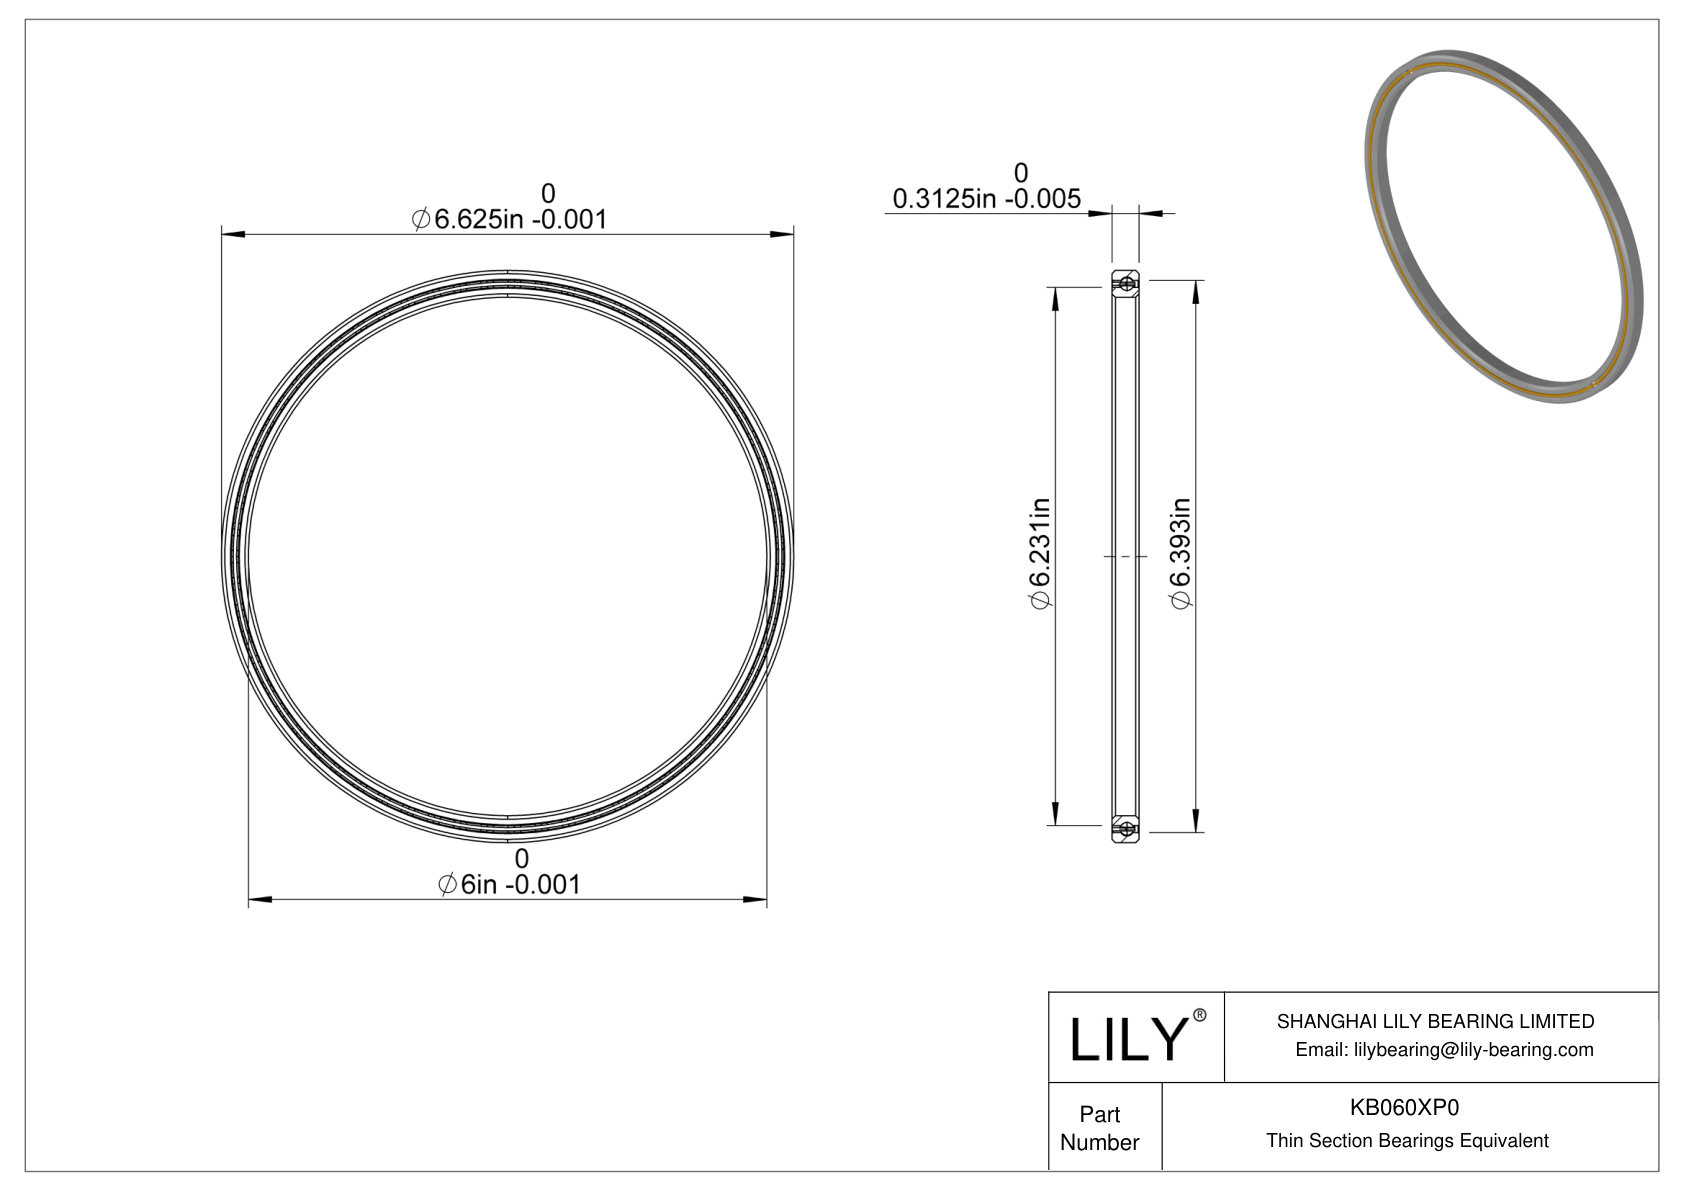 KB060XP0 Constant Section (CS) Bearings cad drawing